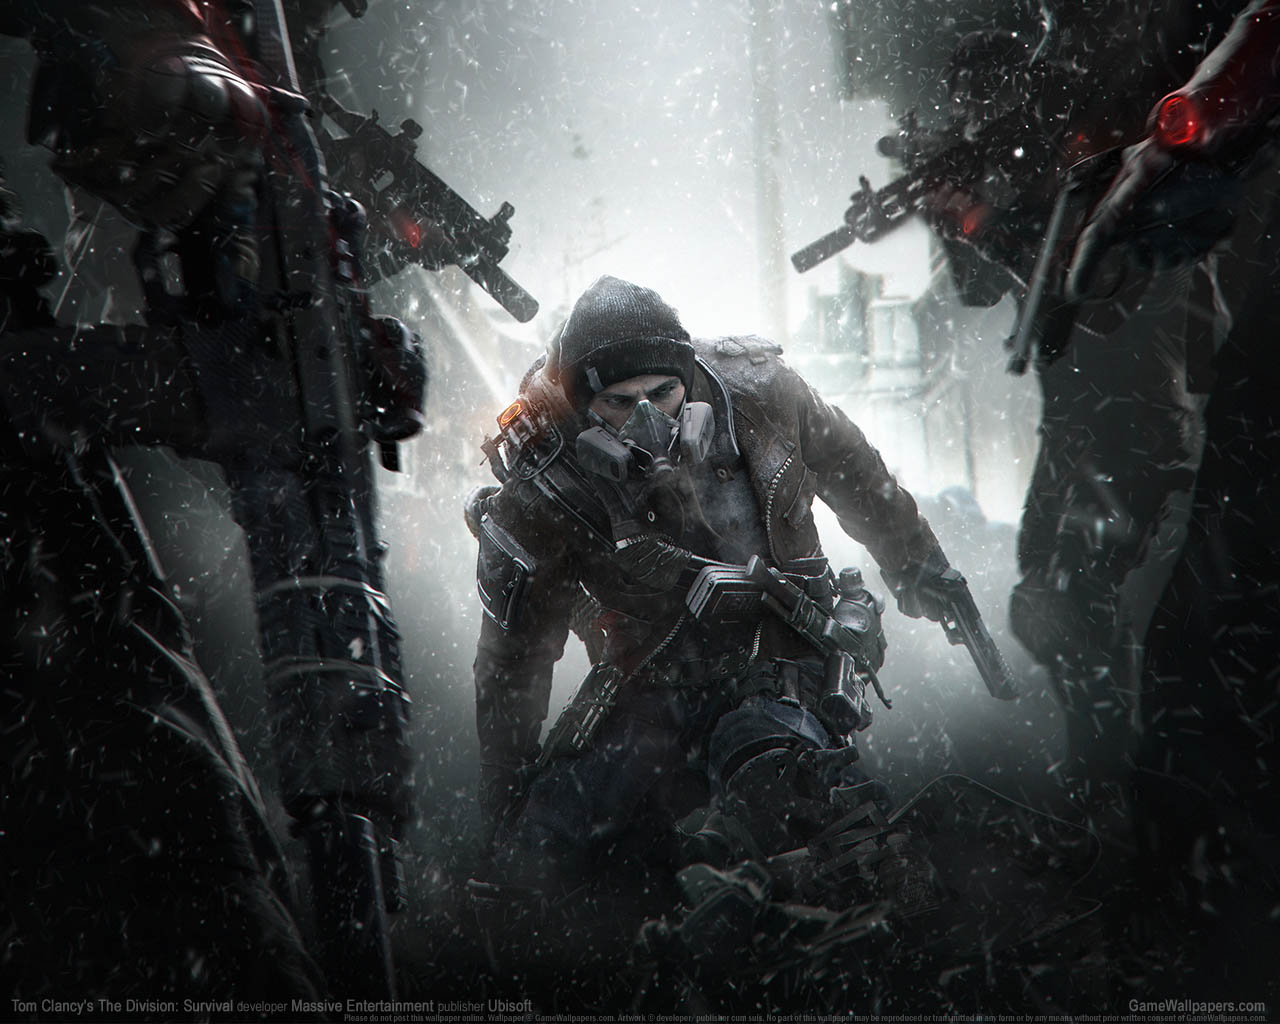 Tom Clancy's The Division: Survivalνmmer=01 wallpaper  1280x1024